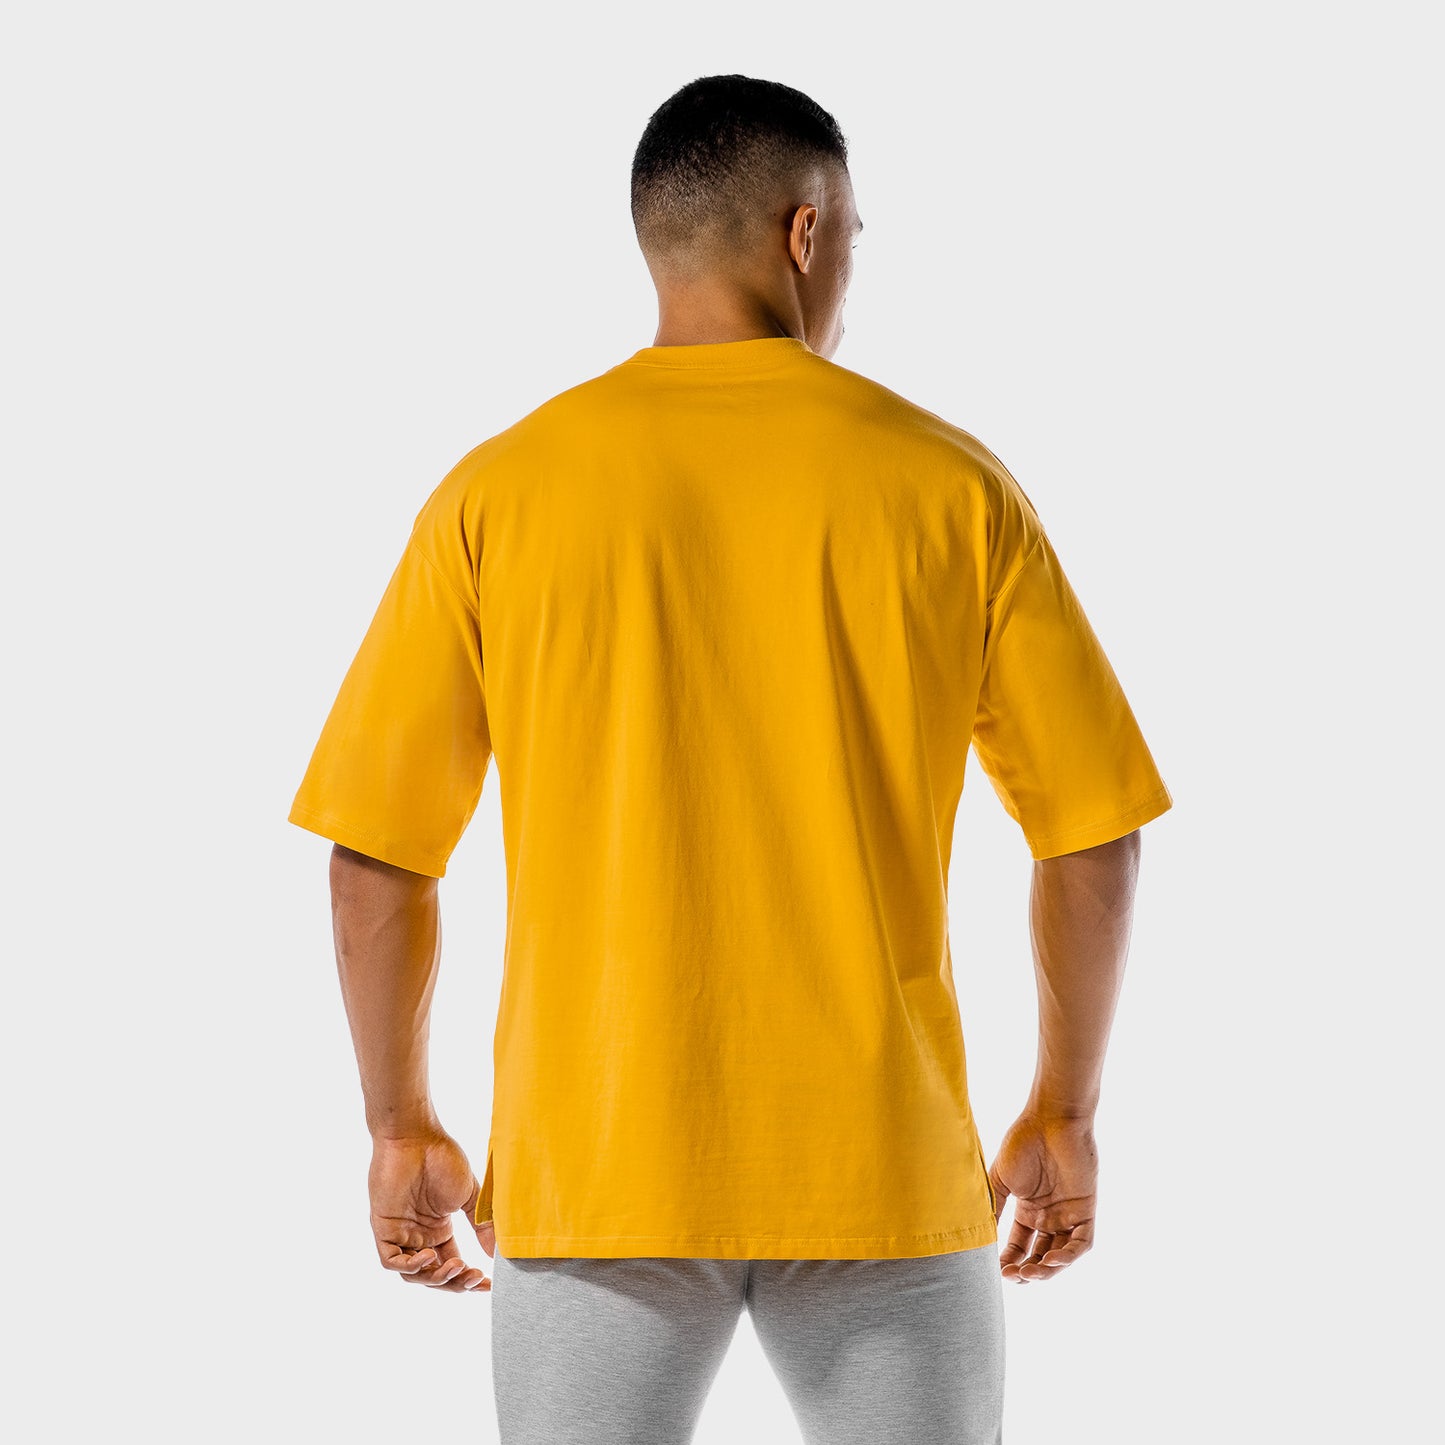 squatwolf-gym-t-shirts-for-women-the-pack-oversize-tee-yellow-workout-clothes